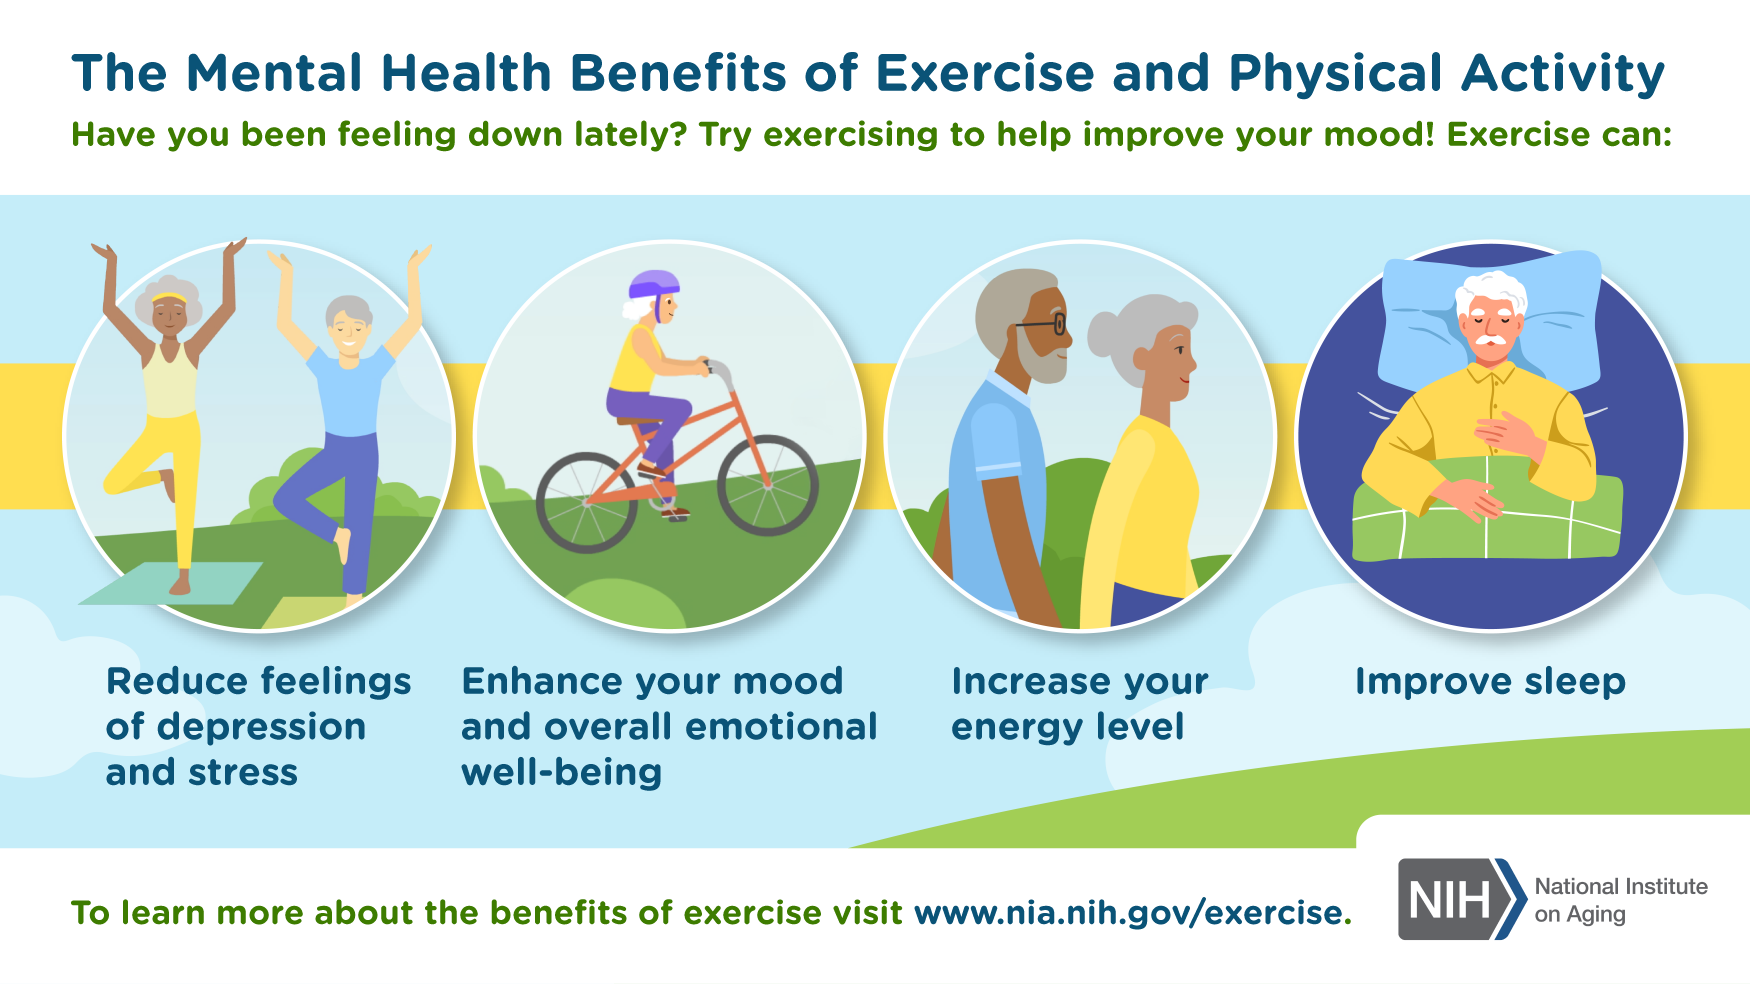 Are there cognitive benefits to staying active?